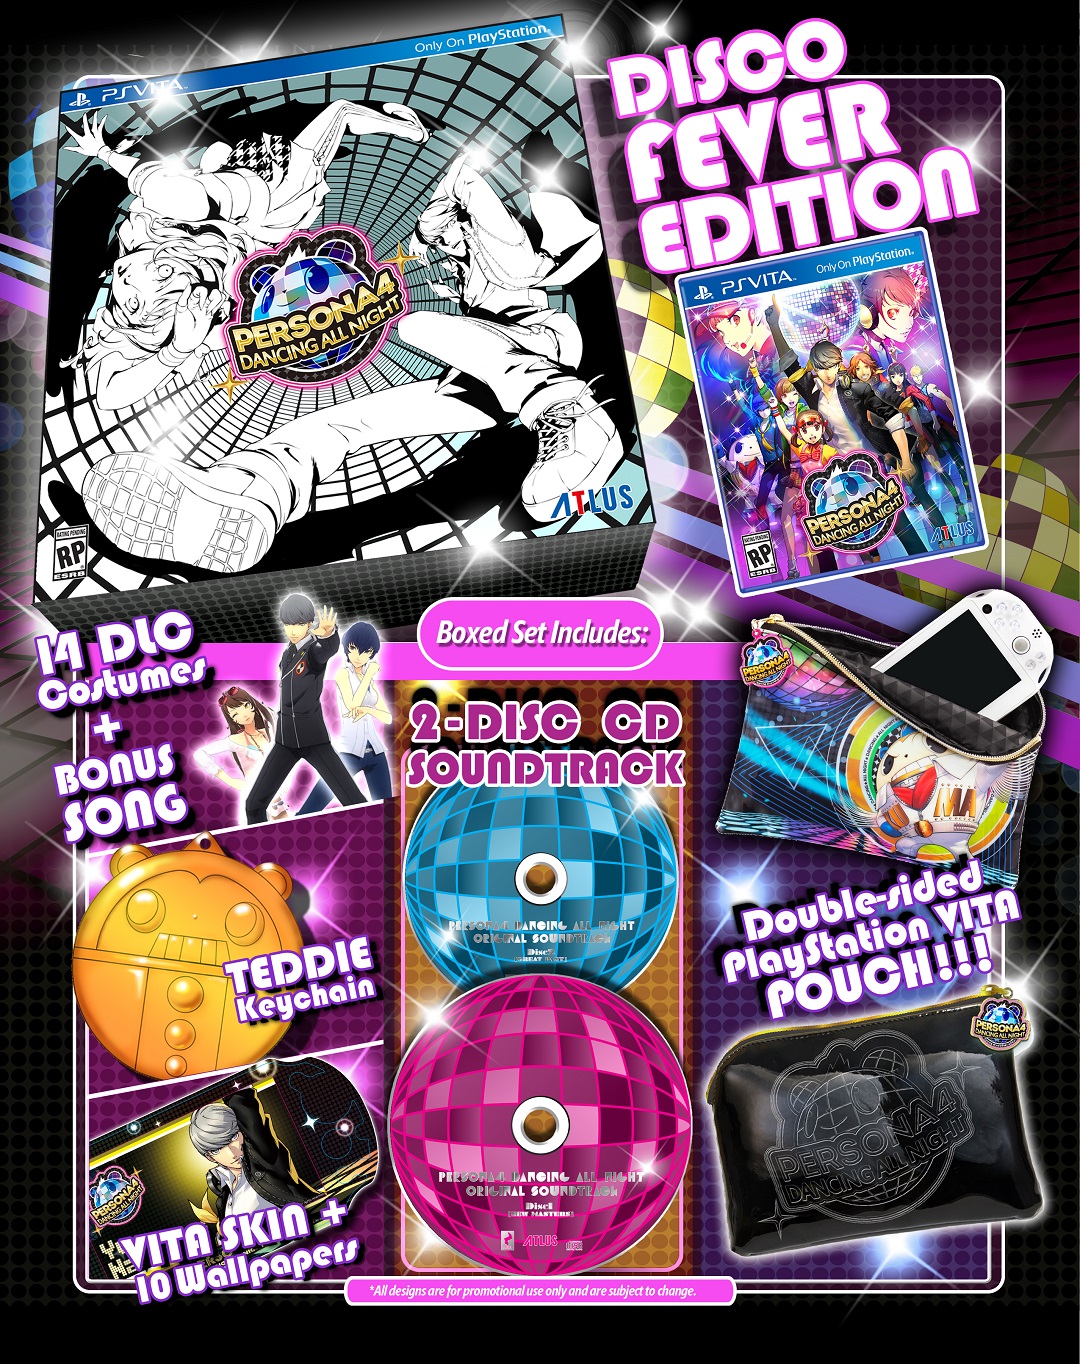 Persona 4: Dancing All Night Western Date Confirmed, Launch and Limited Editions Revealed